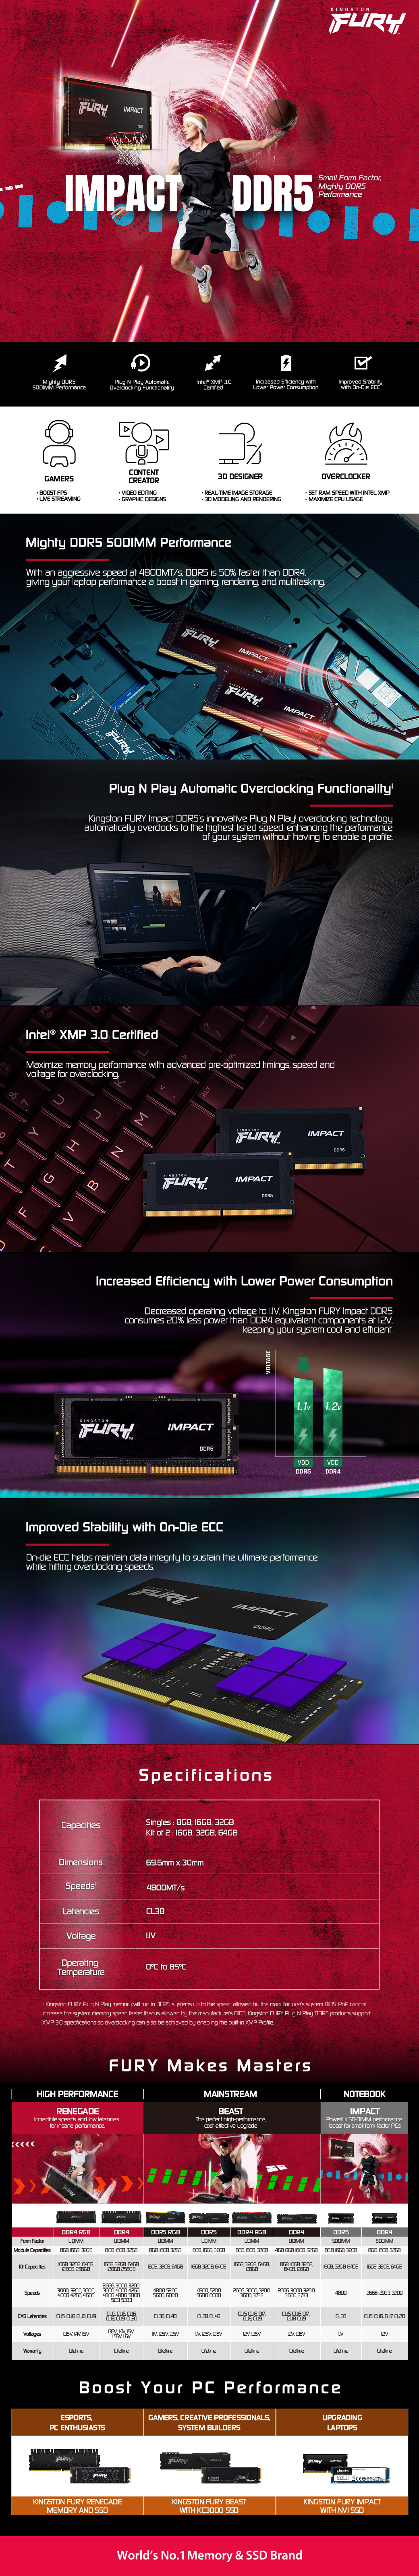 A large marketing image providing additional information about the product Kingston 32GB Single (1x32GB) DDR5 Fury Impact SO-DIMM C40 5600MHz - Black - Additional alt info not provided